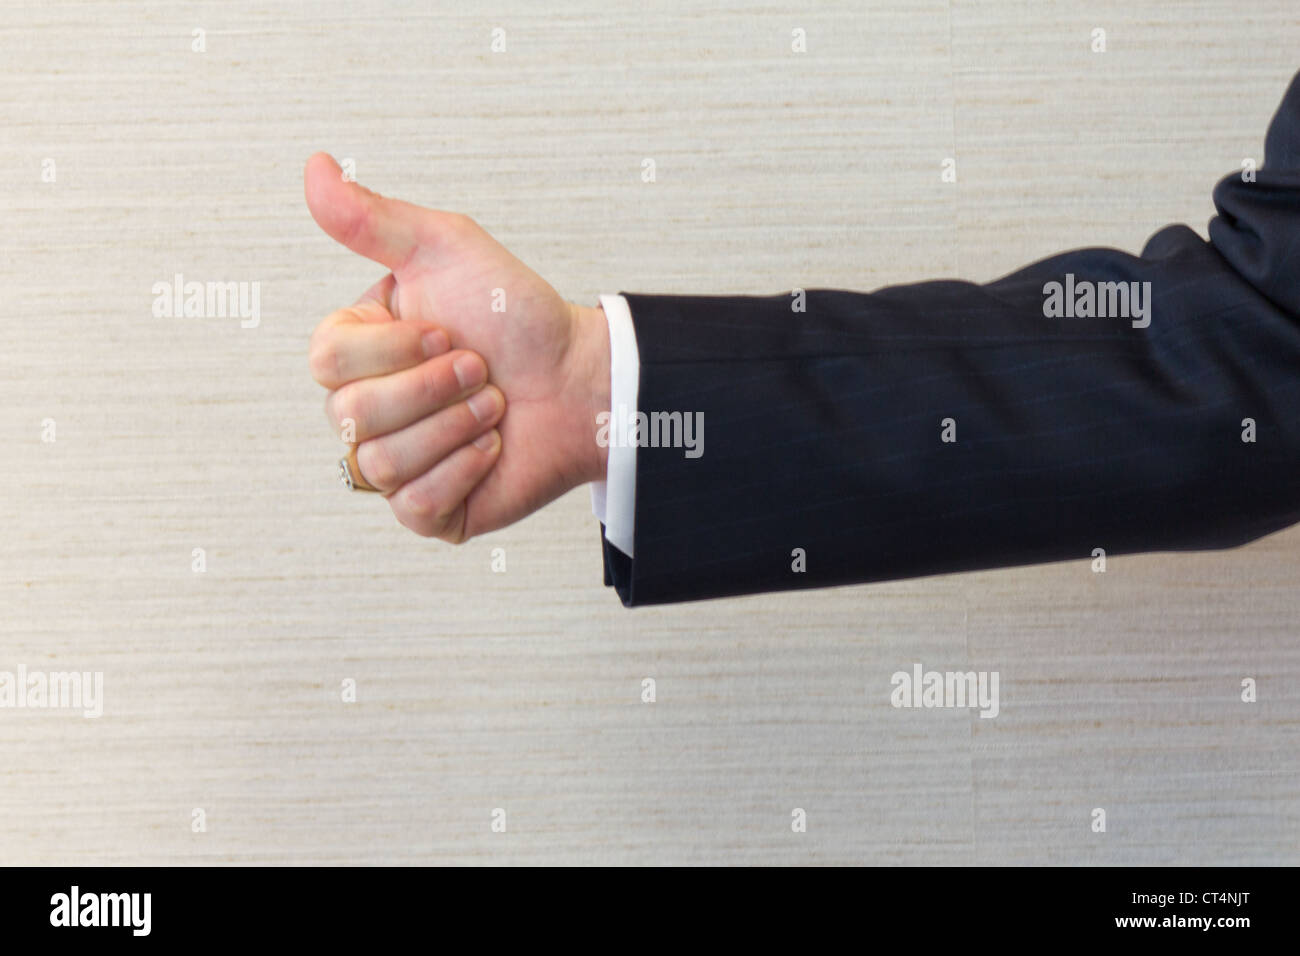 Le business man gesturing Thumbs up sign. Banque D'Images